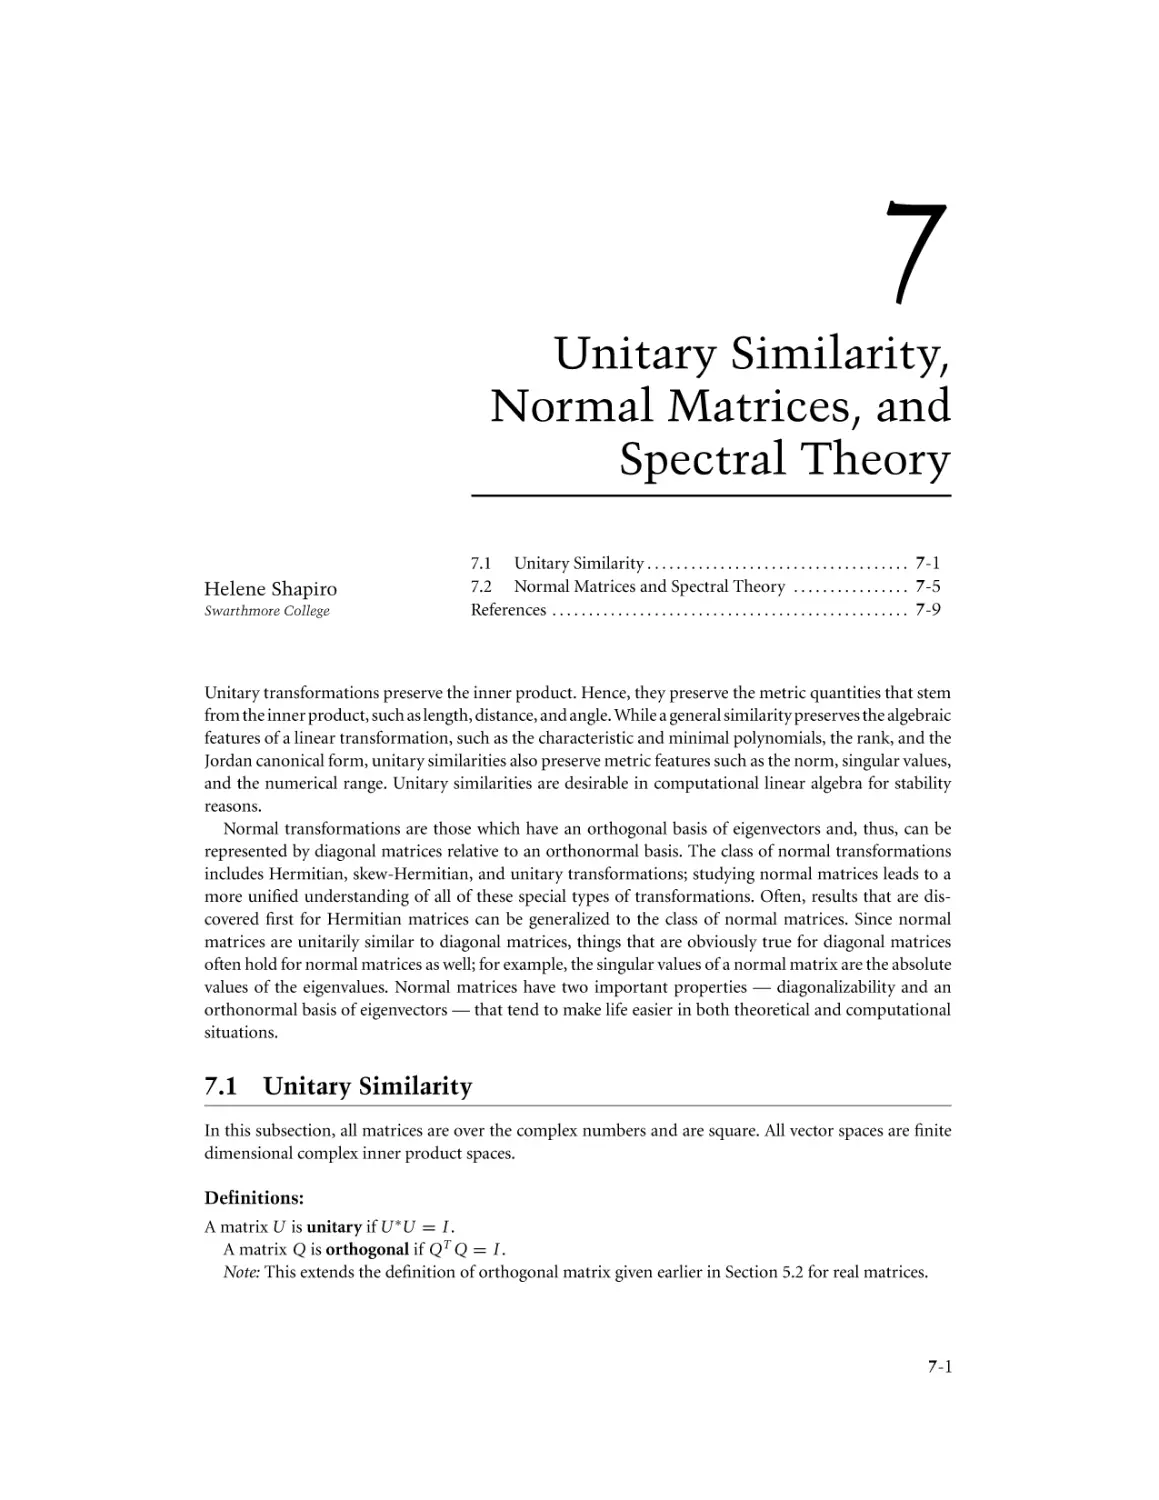 Chapter 7. Unitary Similarity, Normal Matrices, and Spectral Theory